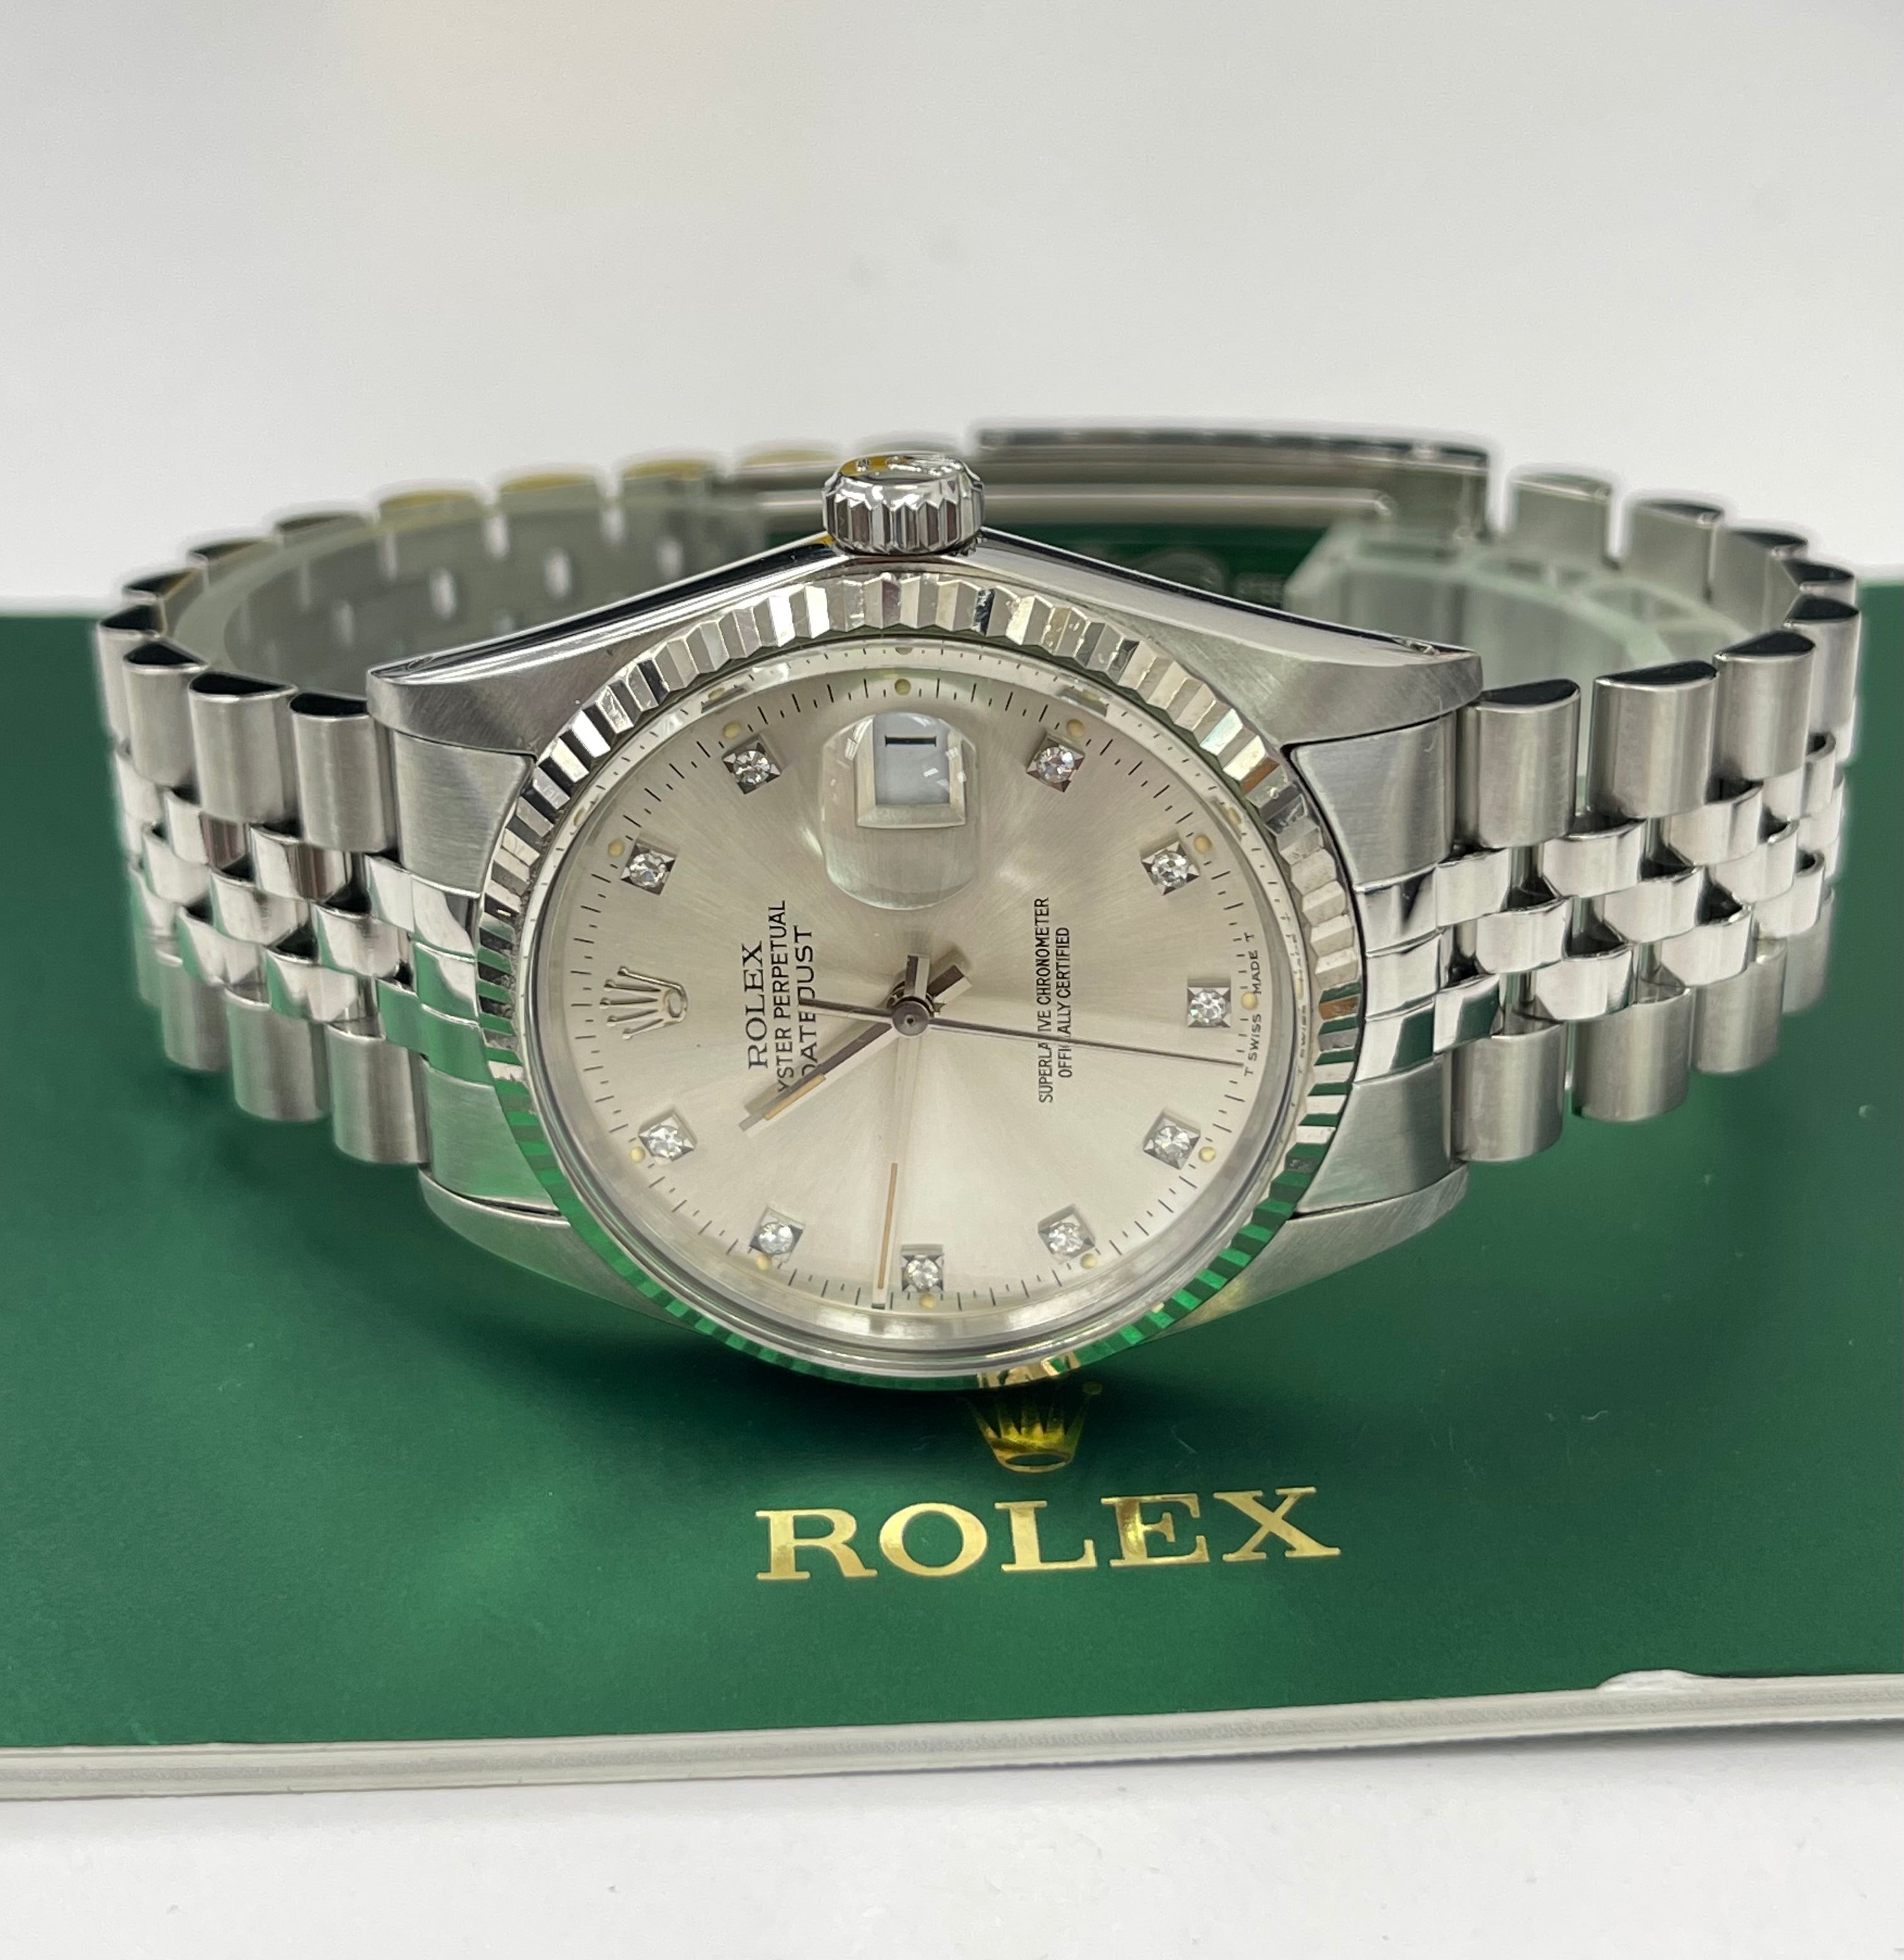 Rolex Datejust 36mm Factory Diamond Dial Stainless Steel Ref 16014